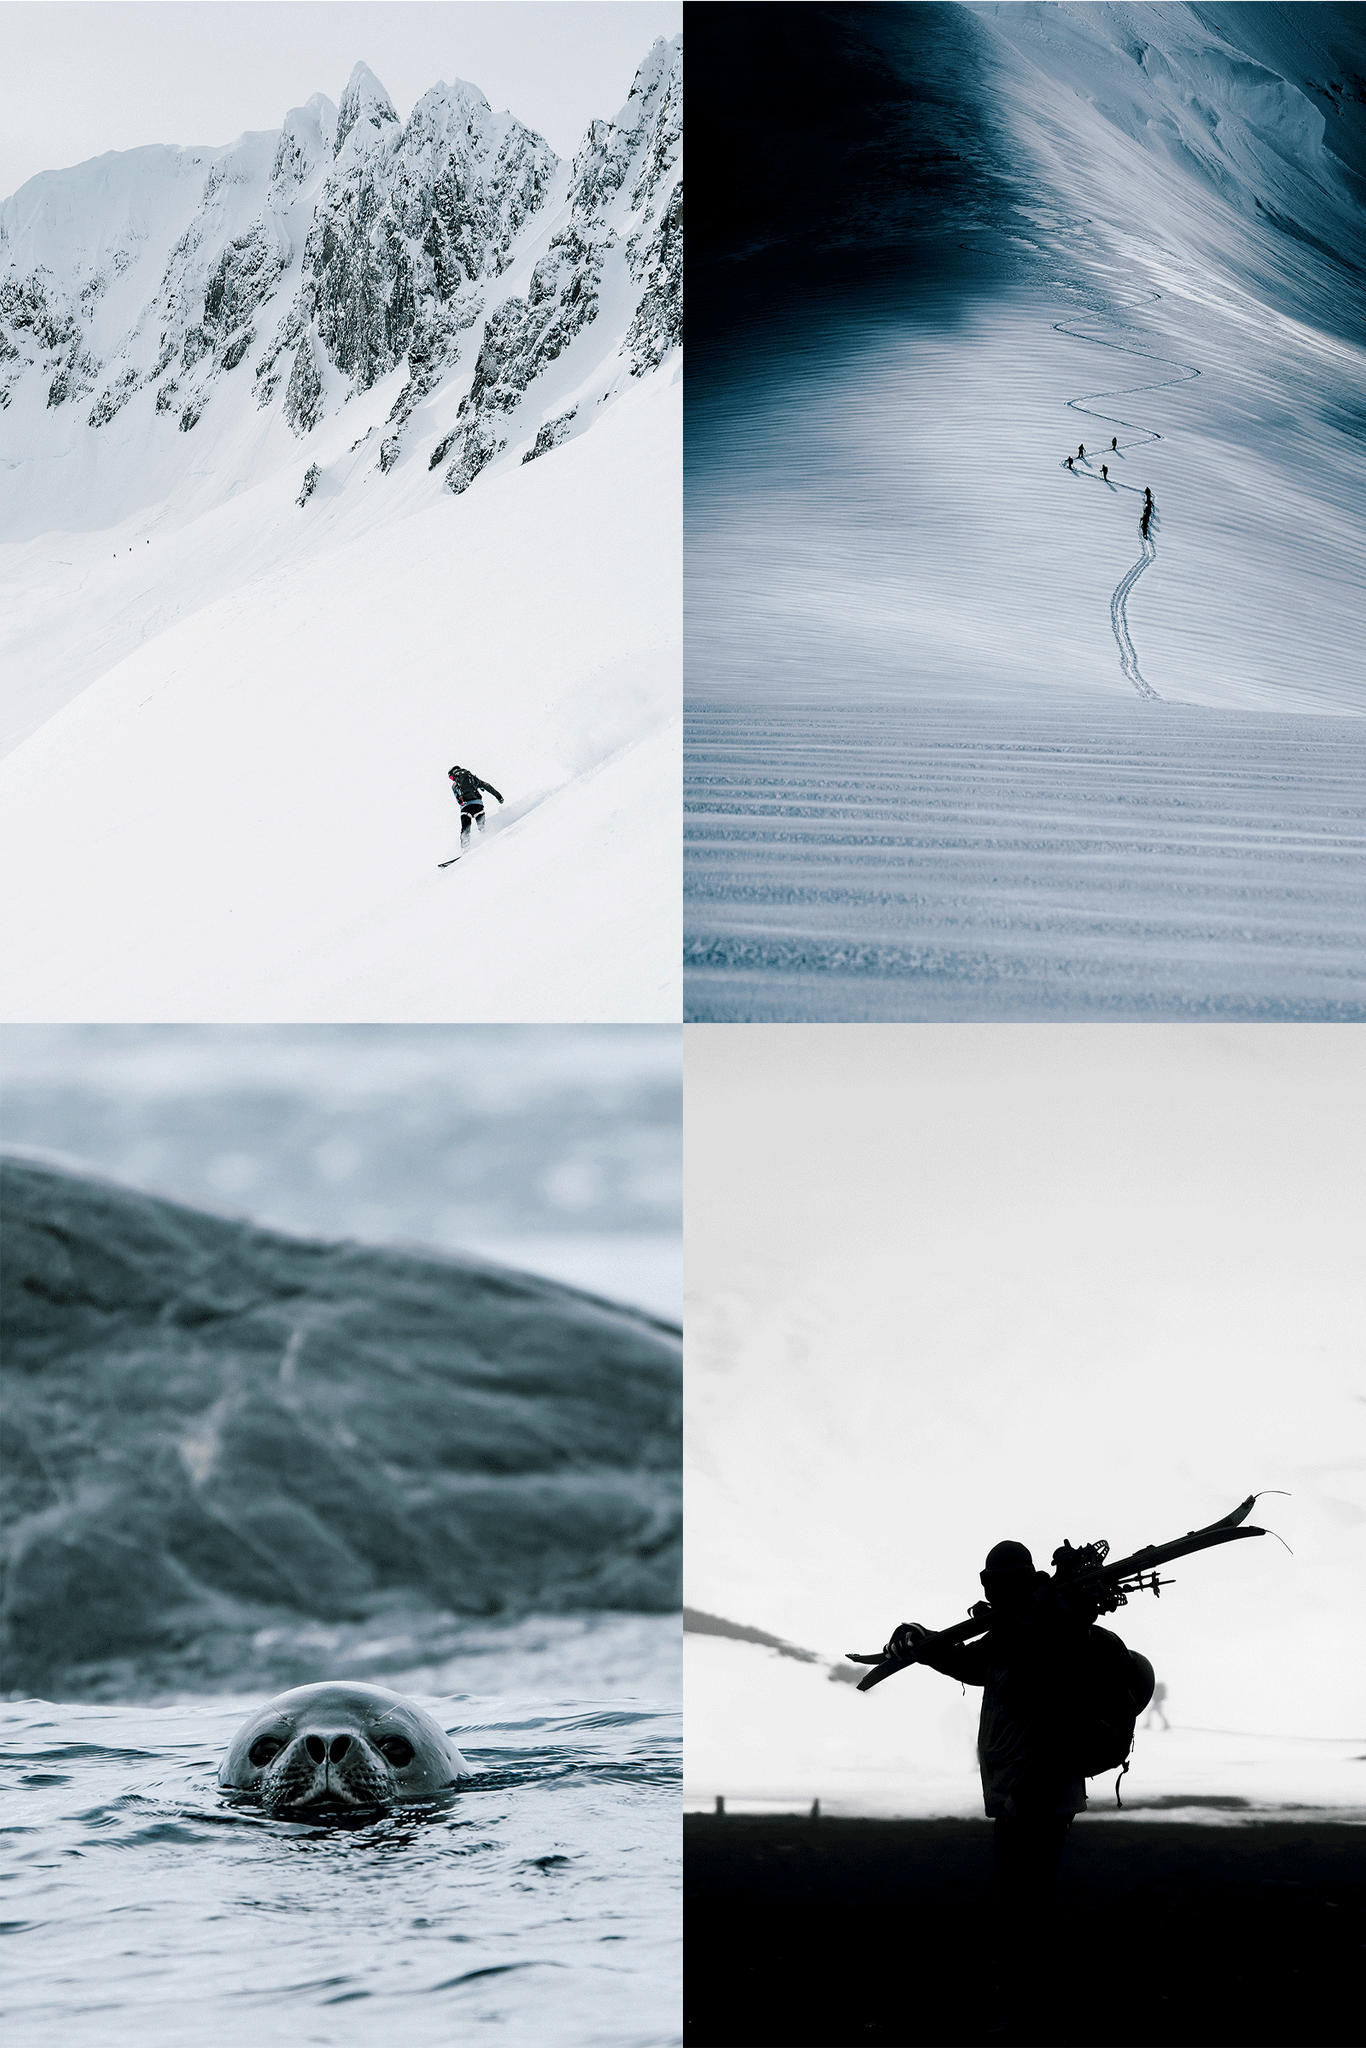 (top left)split boarder in scenic skin track (top right) moody skin track (bottom left) seal face emerging from water (bottom right) black and white skier profile